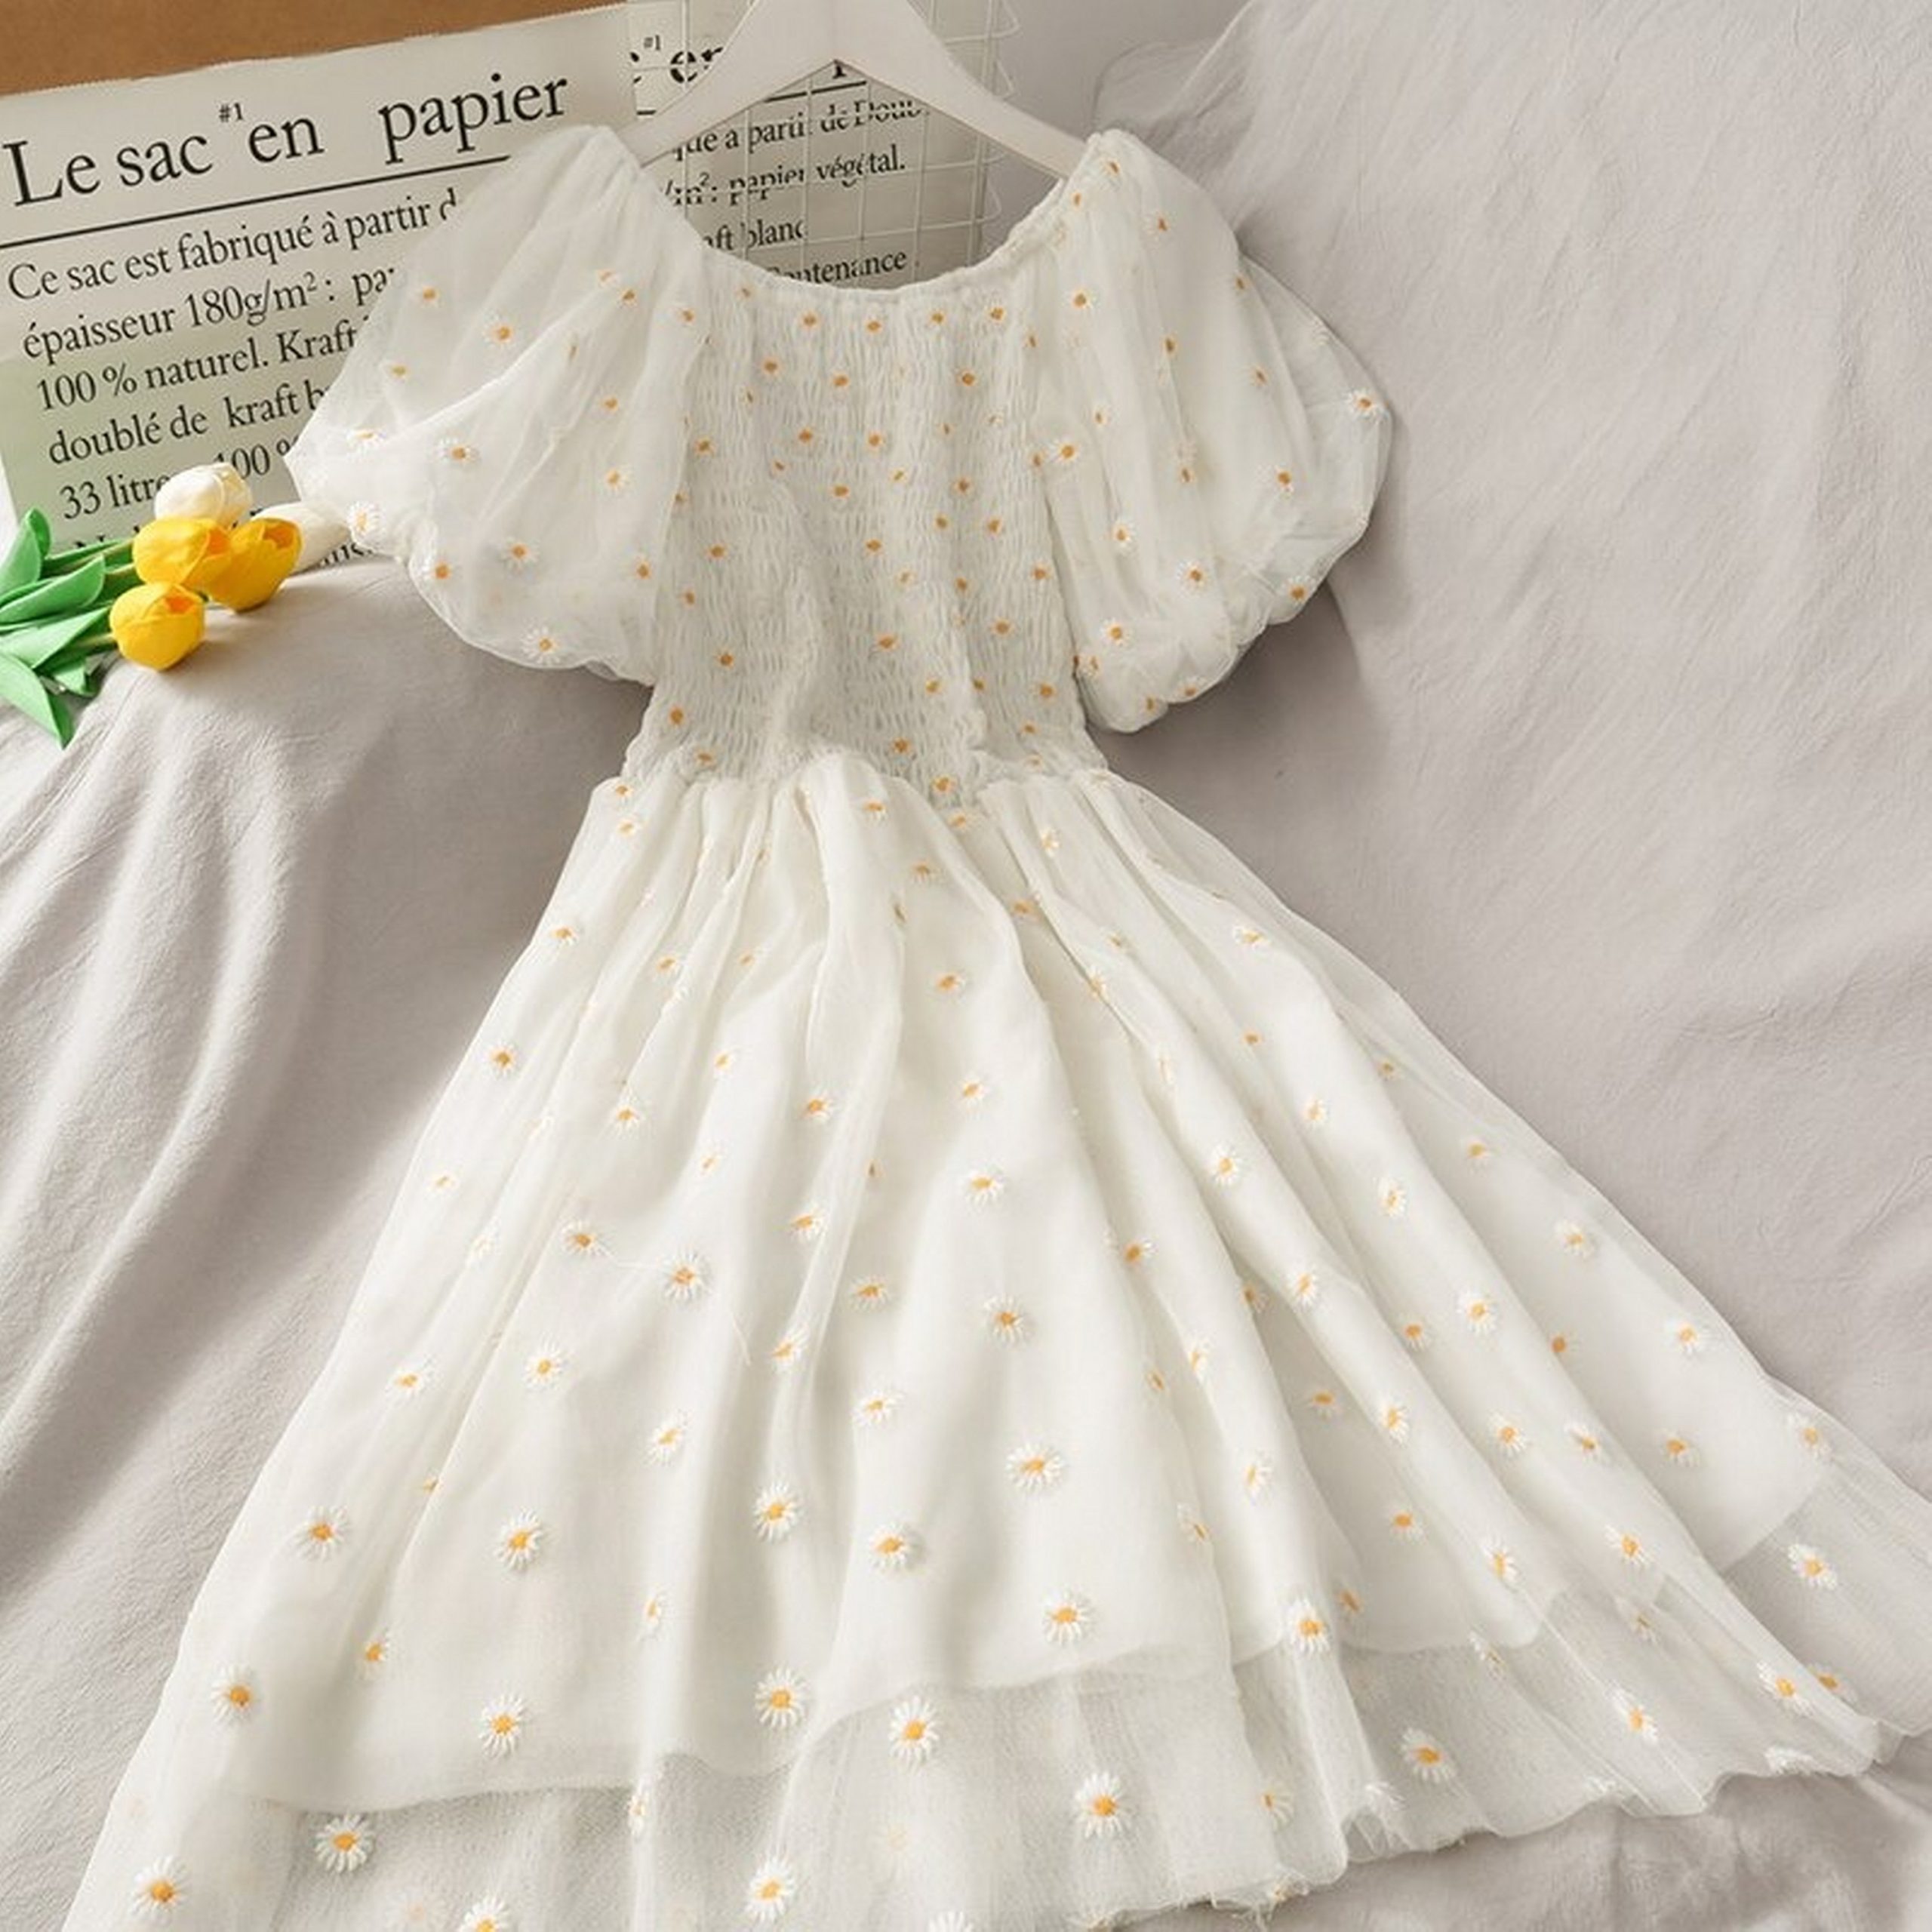 Daisy Flower Embroidery Mesh Lace Ruched Puff Sleeve Short Summer Sweet Dress Y2k Aesthetic Summer Dress